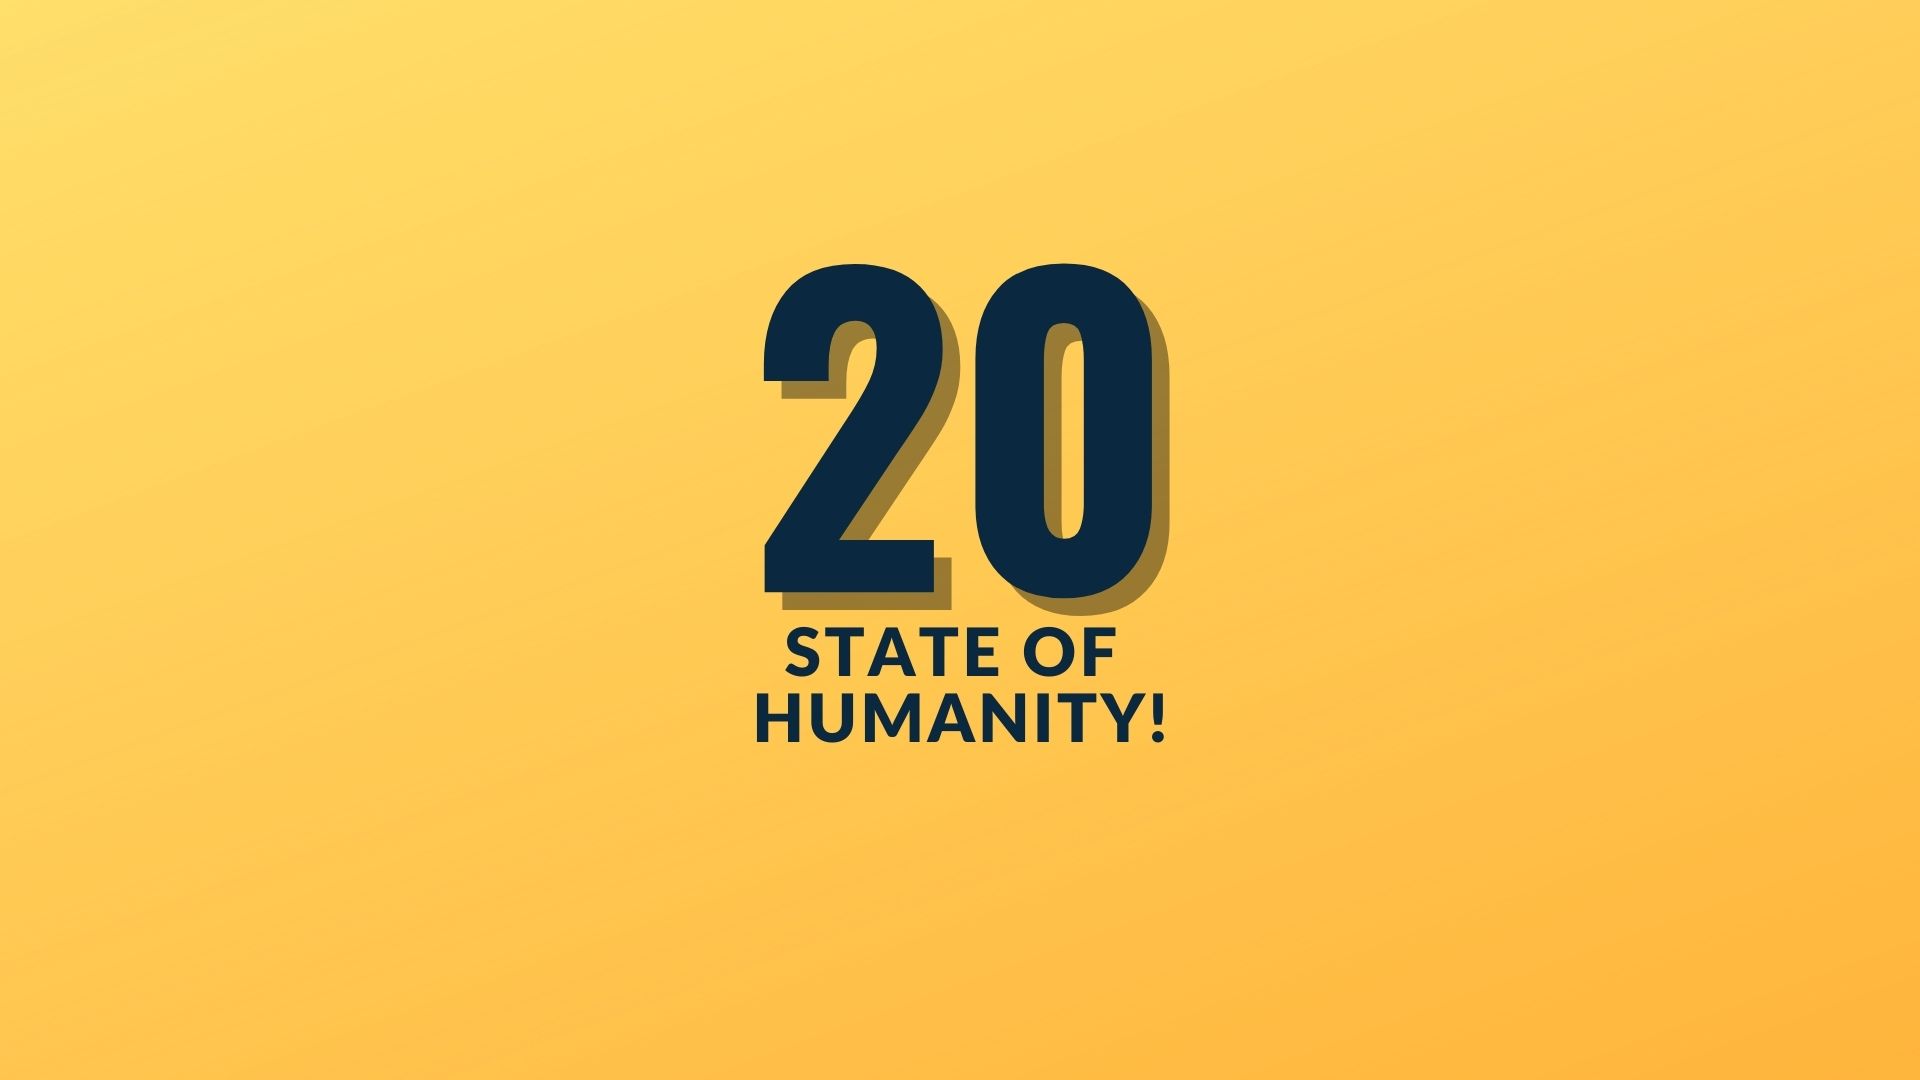 20 State of Humanity!